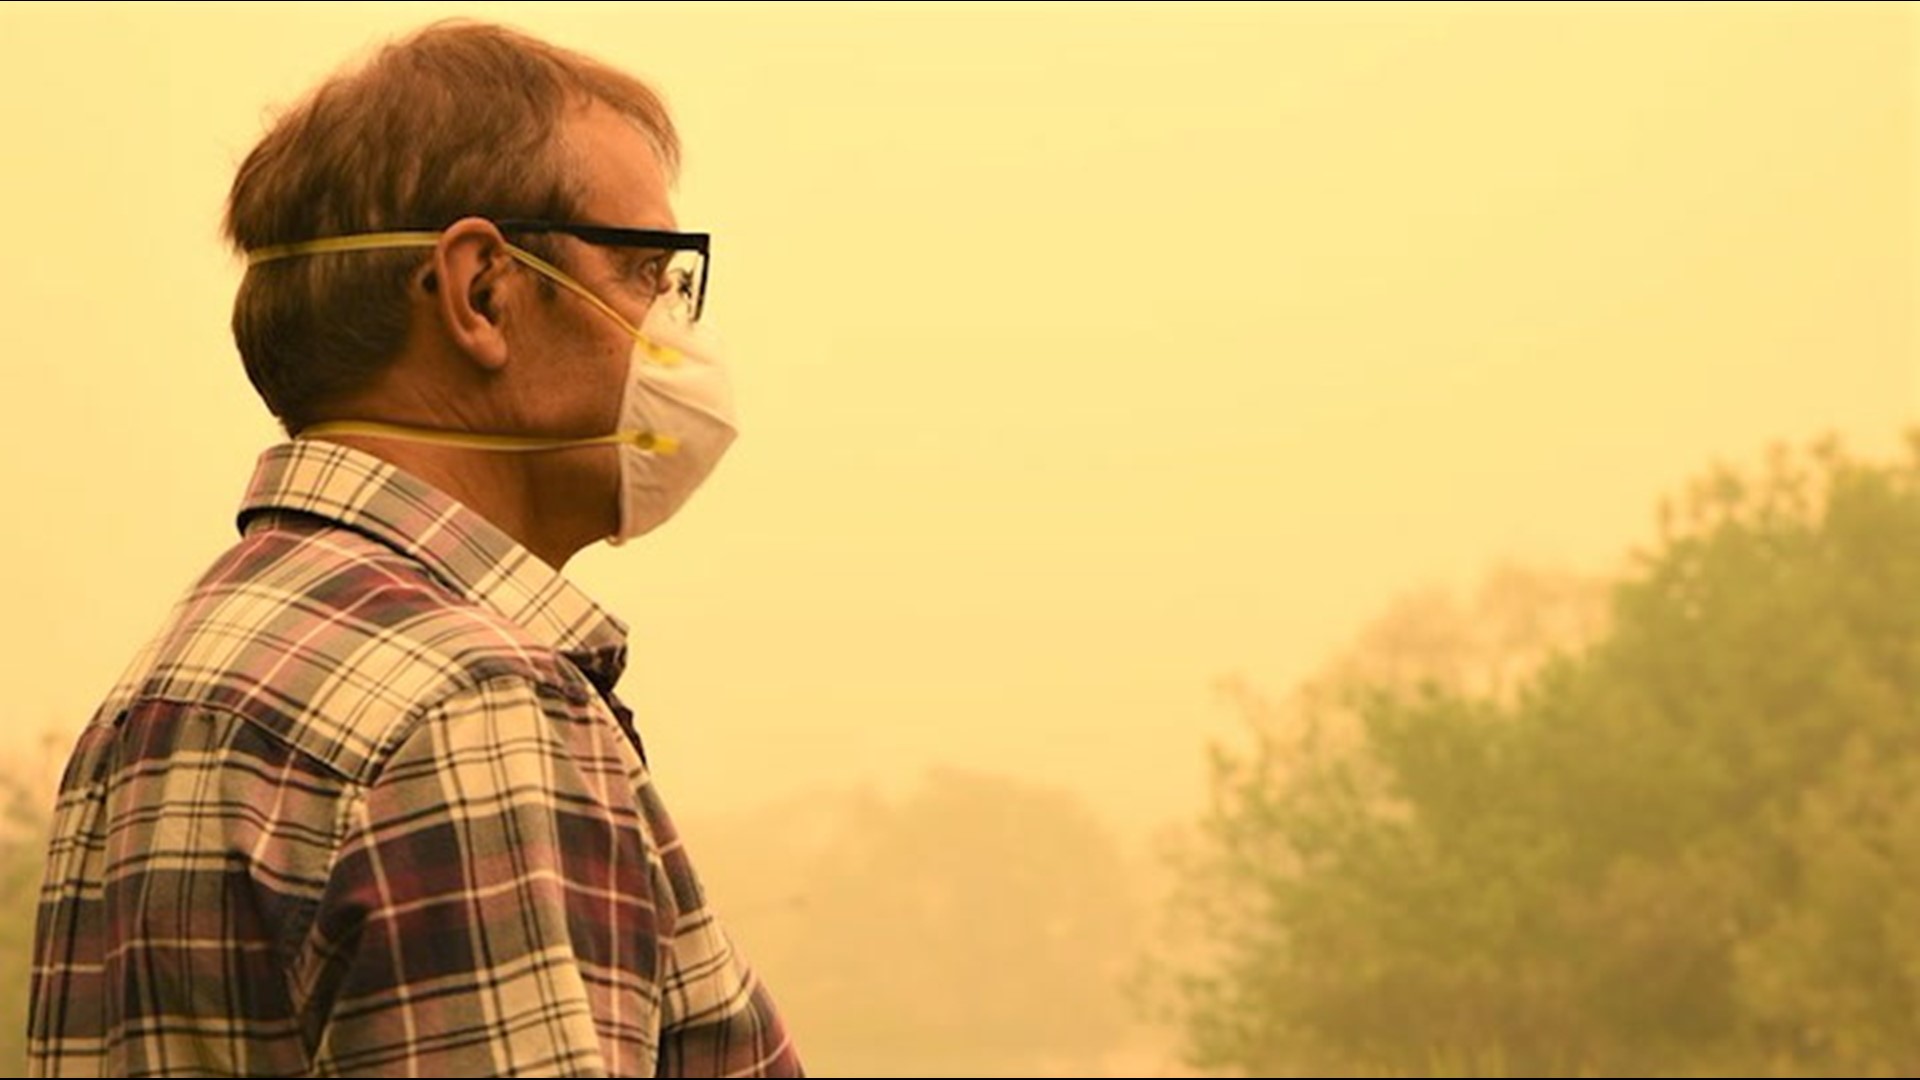 To avoid inhaling wildfire smoke, be sure you're wearing a mask that will protect you from breathing dangerous smoke and gases into your lungs.